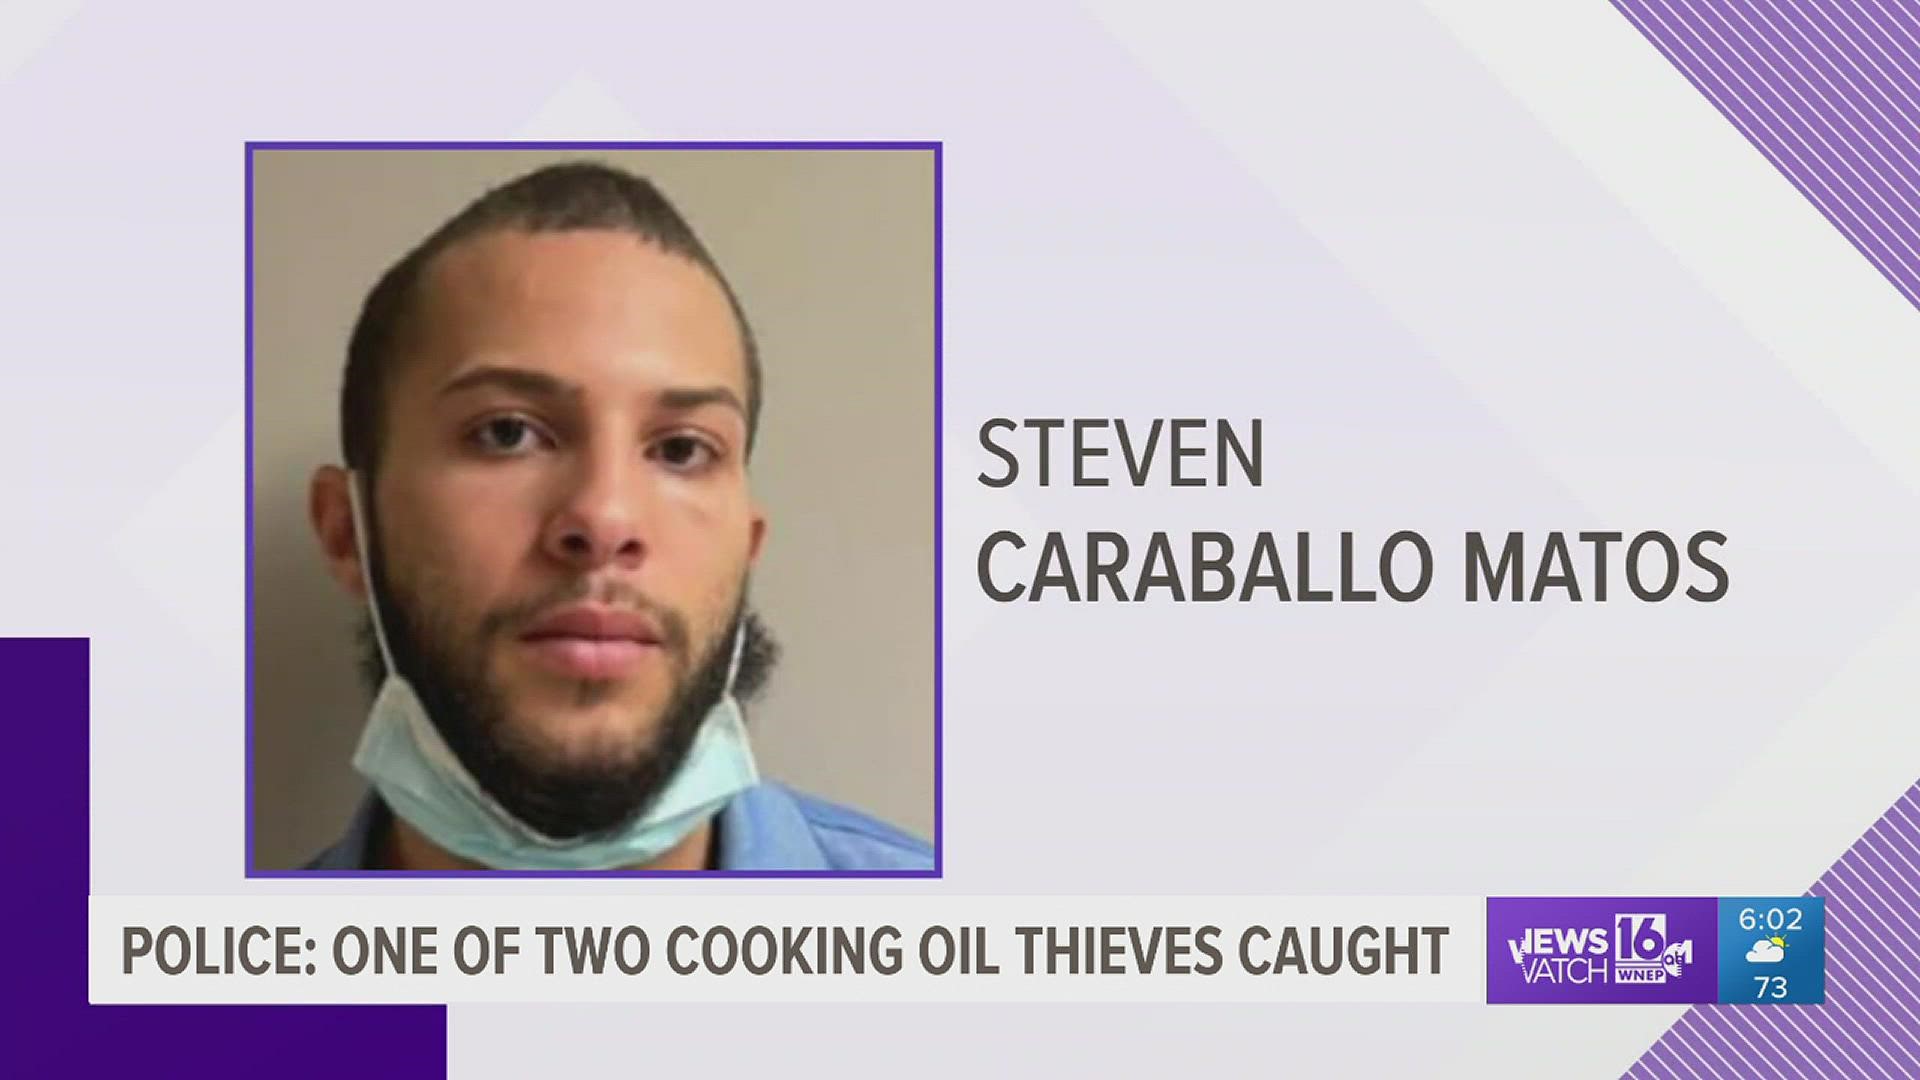 The duo was caught on camera stealing cooking oil from a restaurant in West Pittston last week.